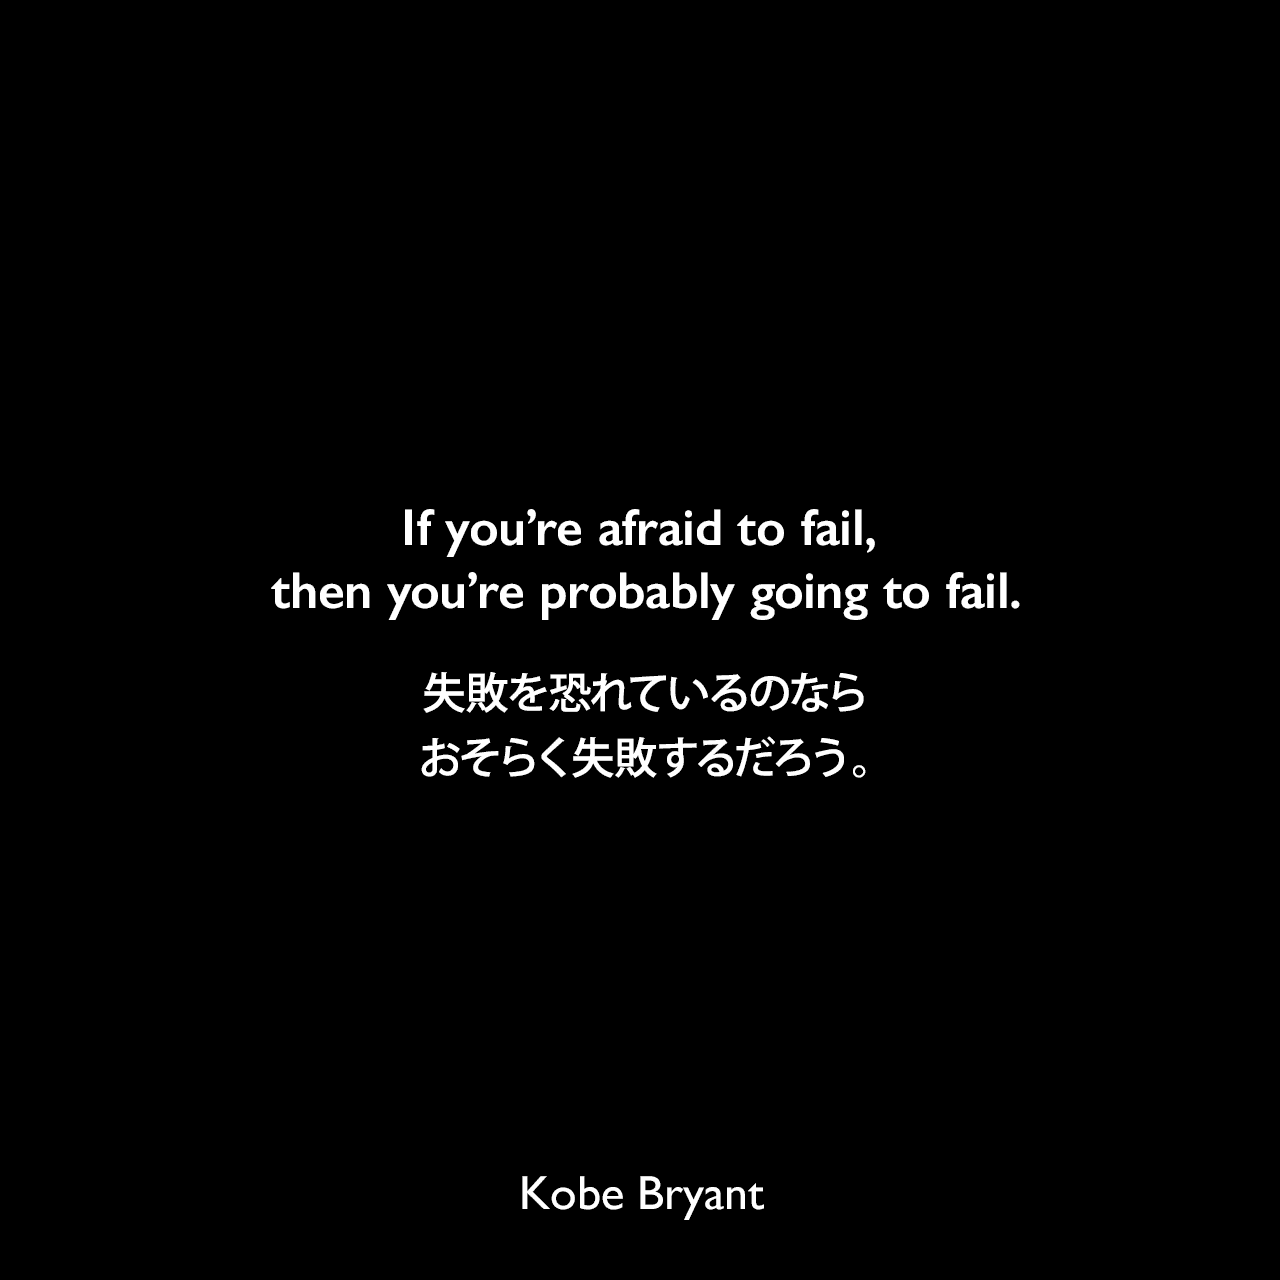 If you’re afraid to fail, then you’re probably going to fail.失敗を恐れているのなら、おそらく失敗するだろう。